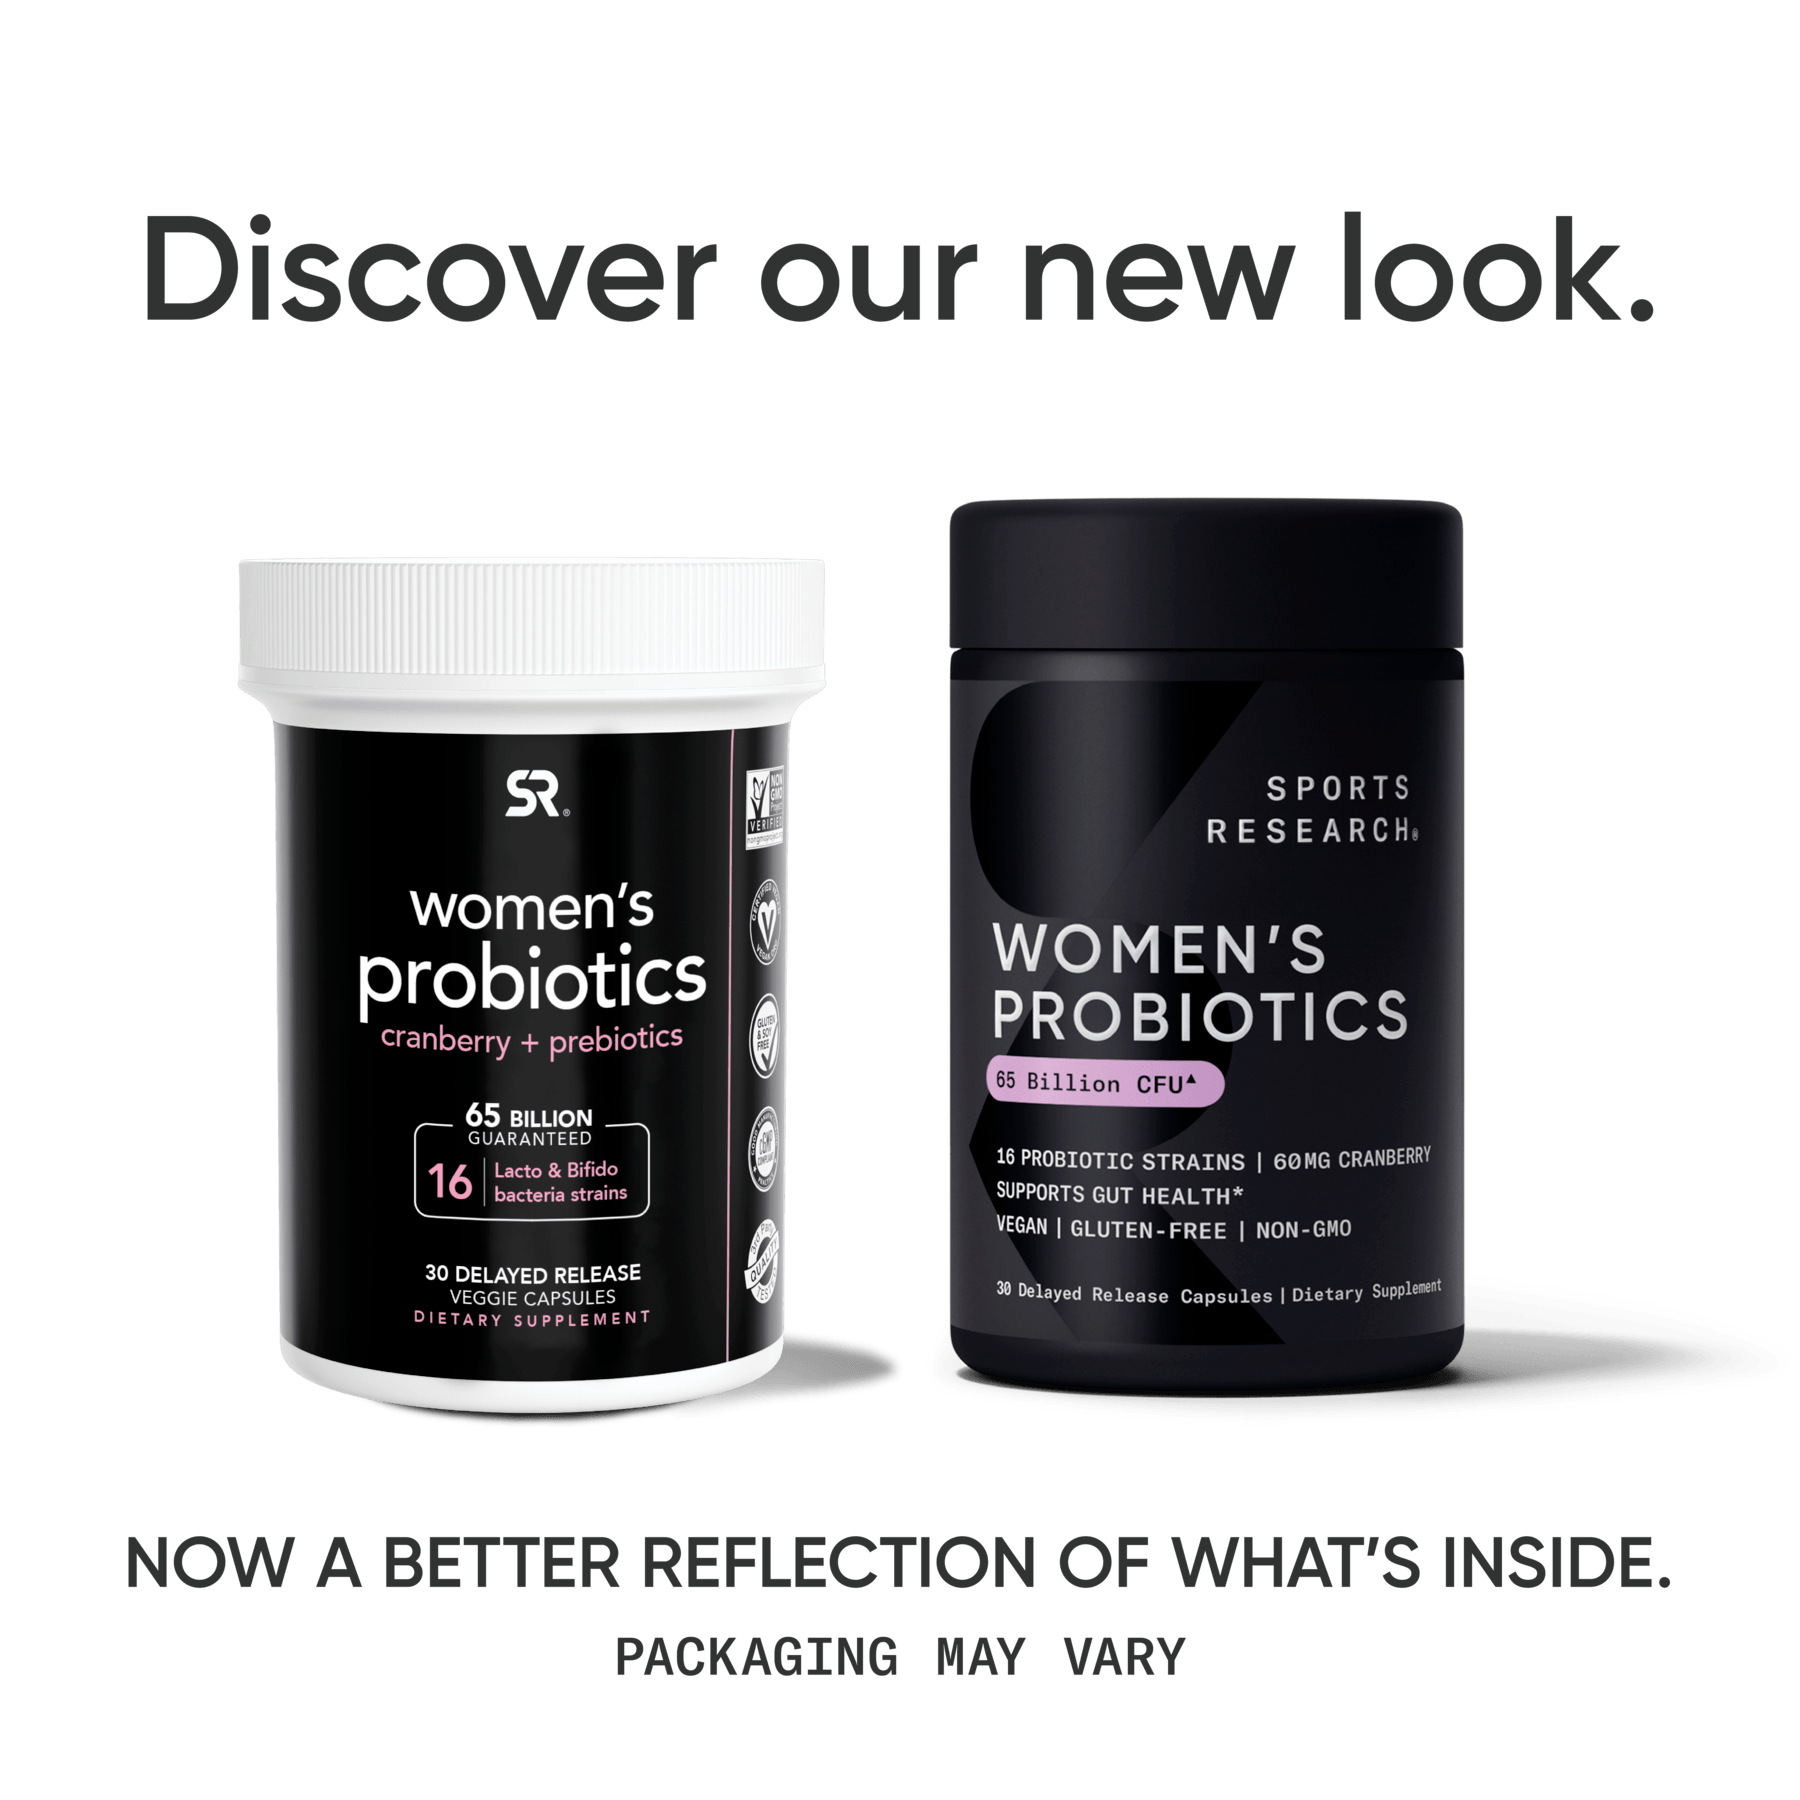 Sports Research Women's Probiotics with Cranberry now better reflection of what's inside.